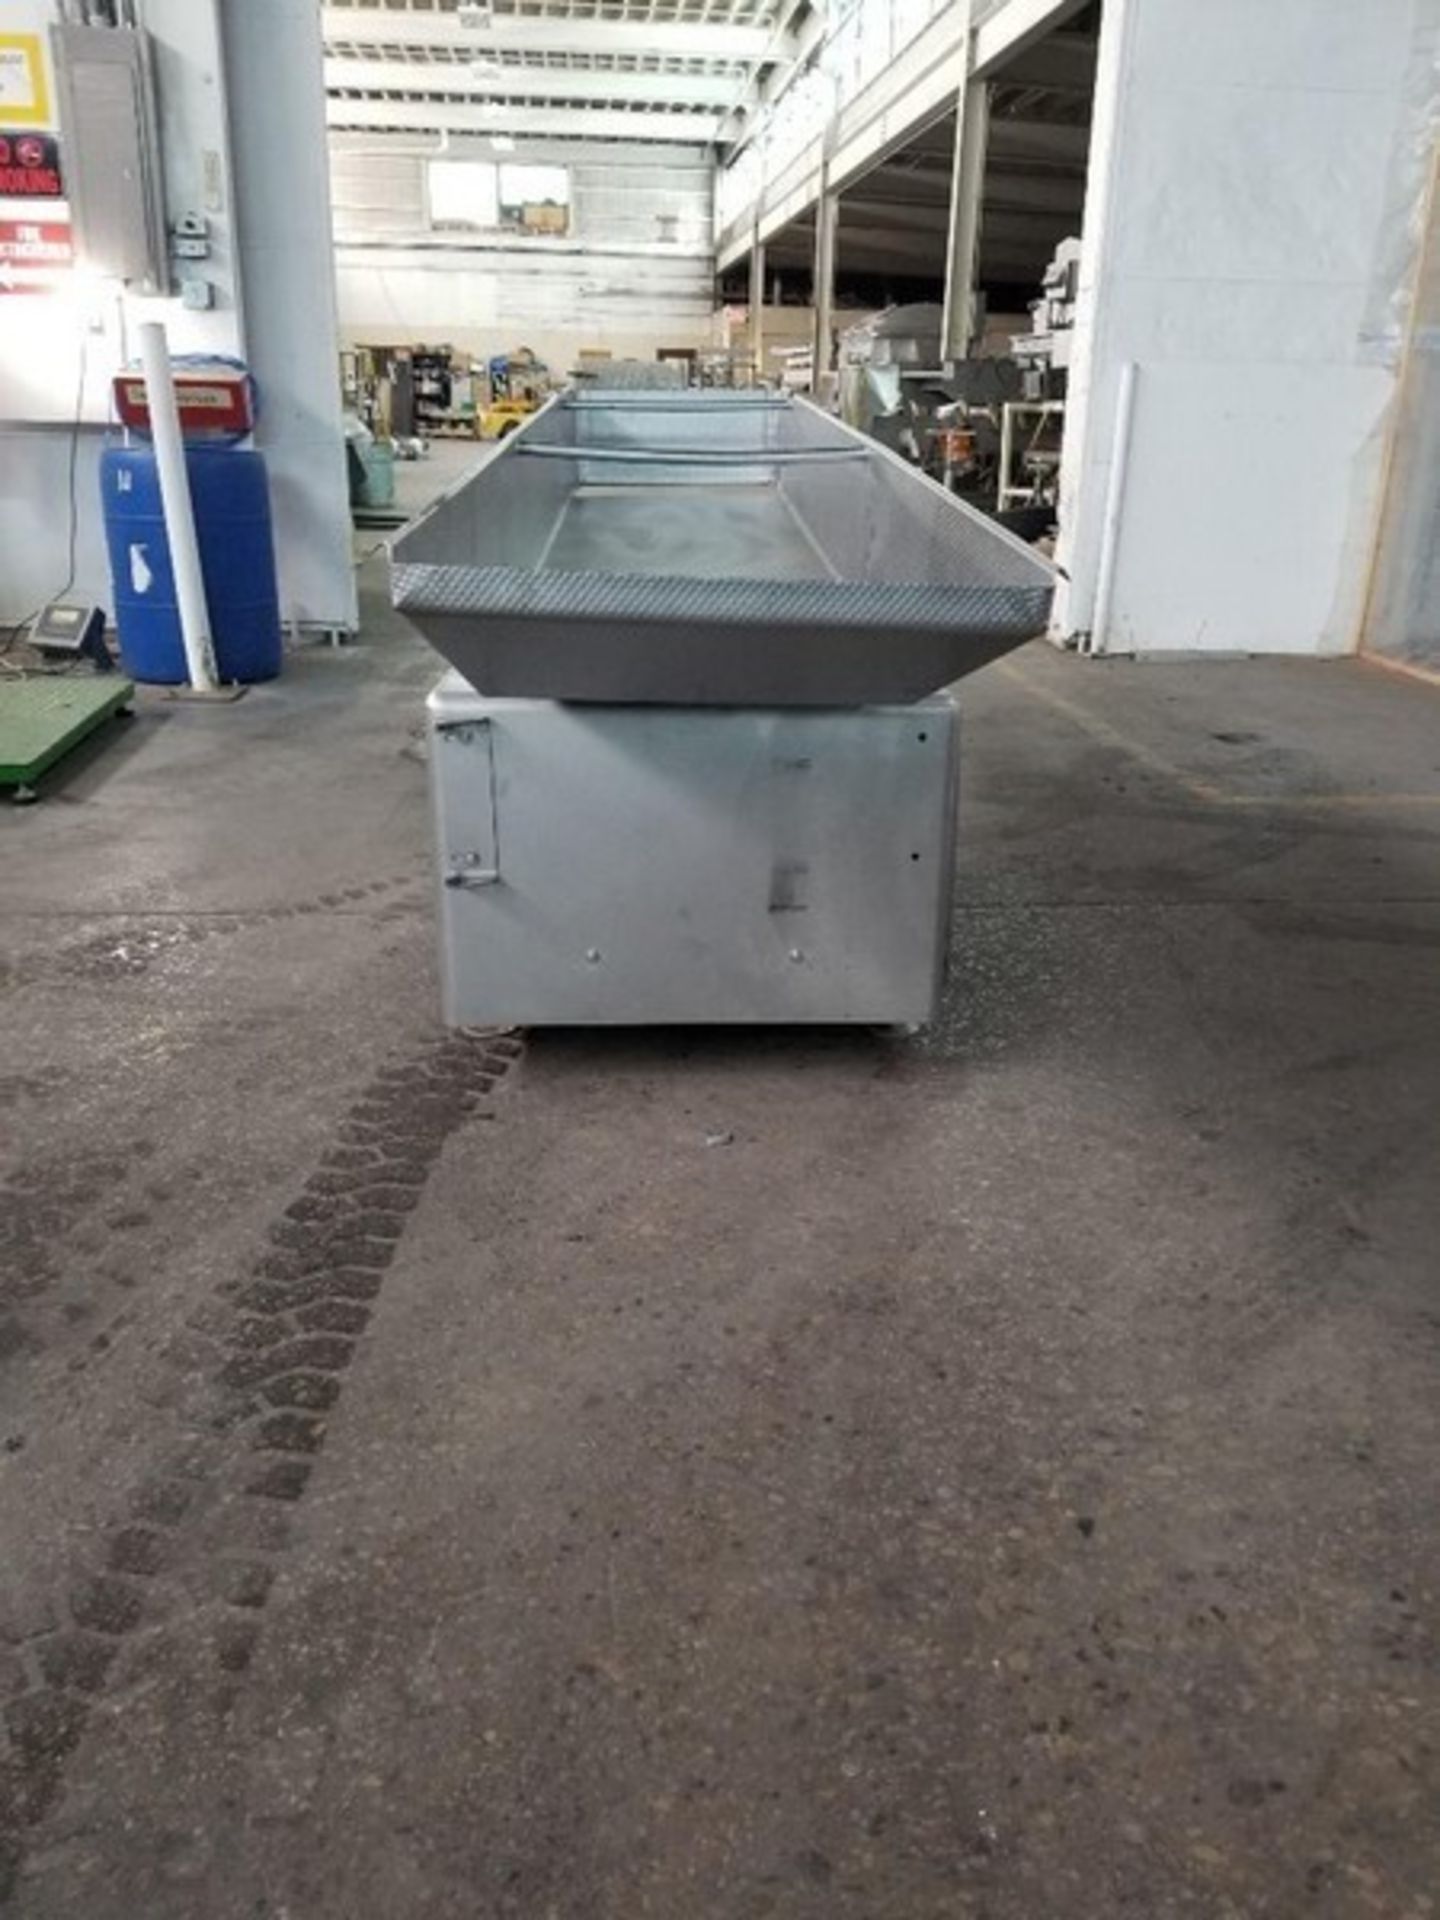 S/S Sanitary Vibratory Scale Feeder, Aprox. 24" W x 132" L. Last Used in Food Industry. Unit Removed - Image 6 of 9